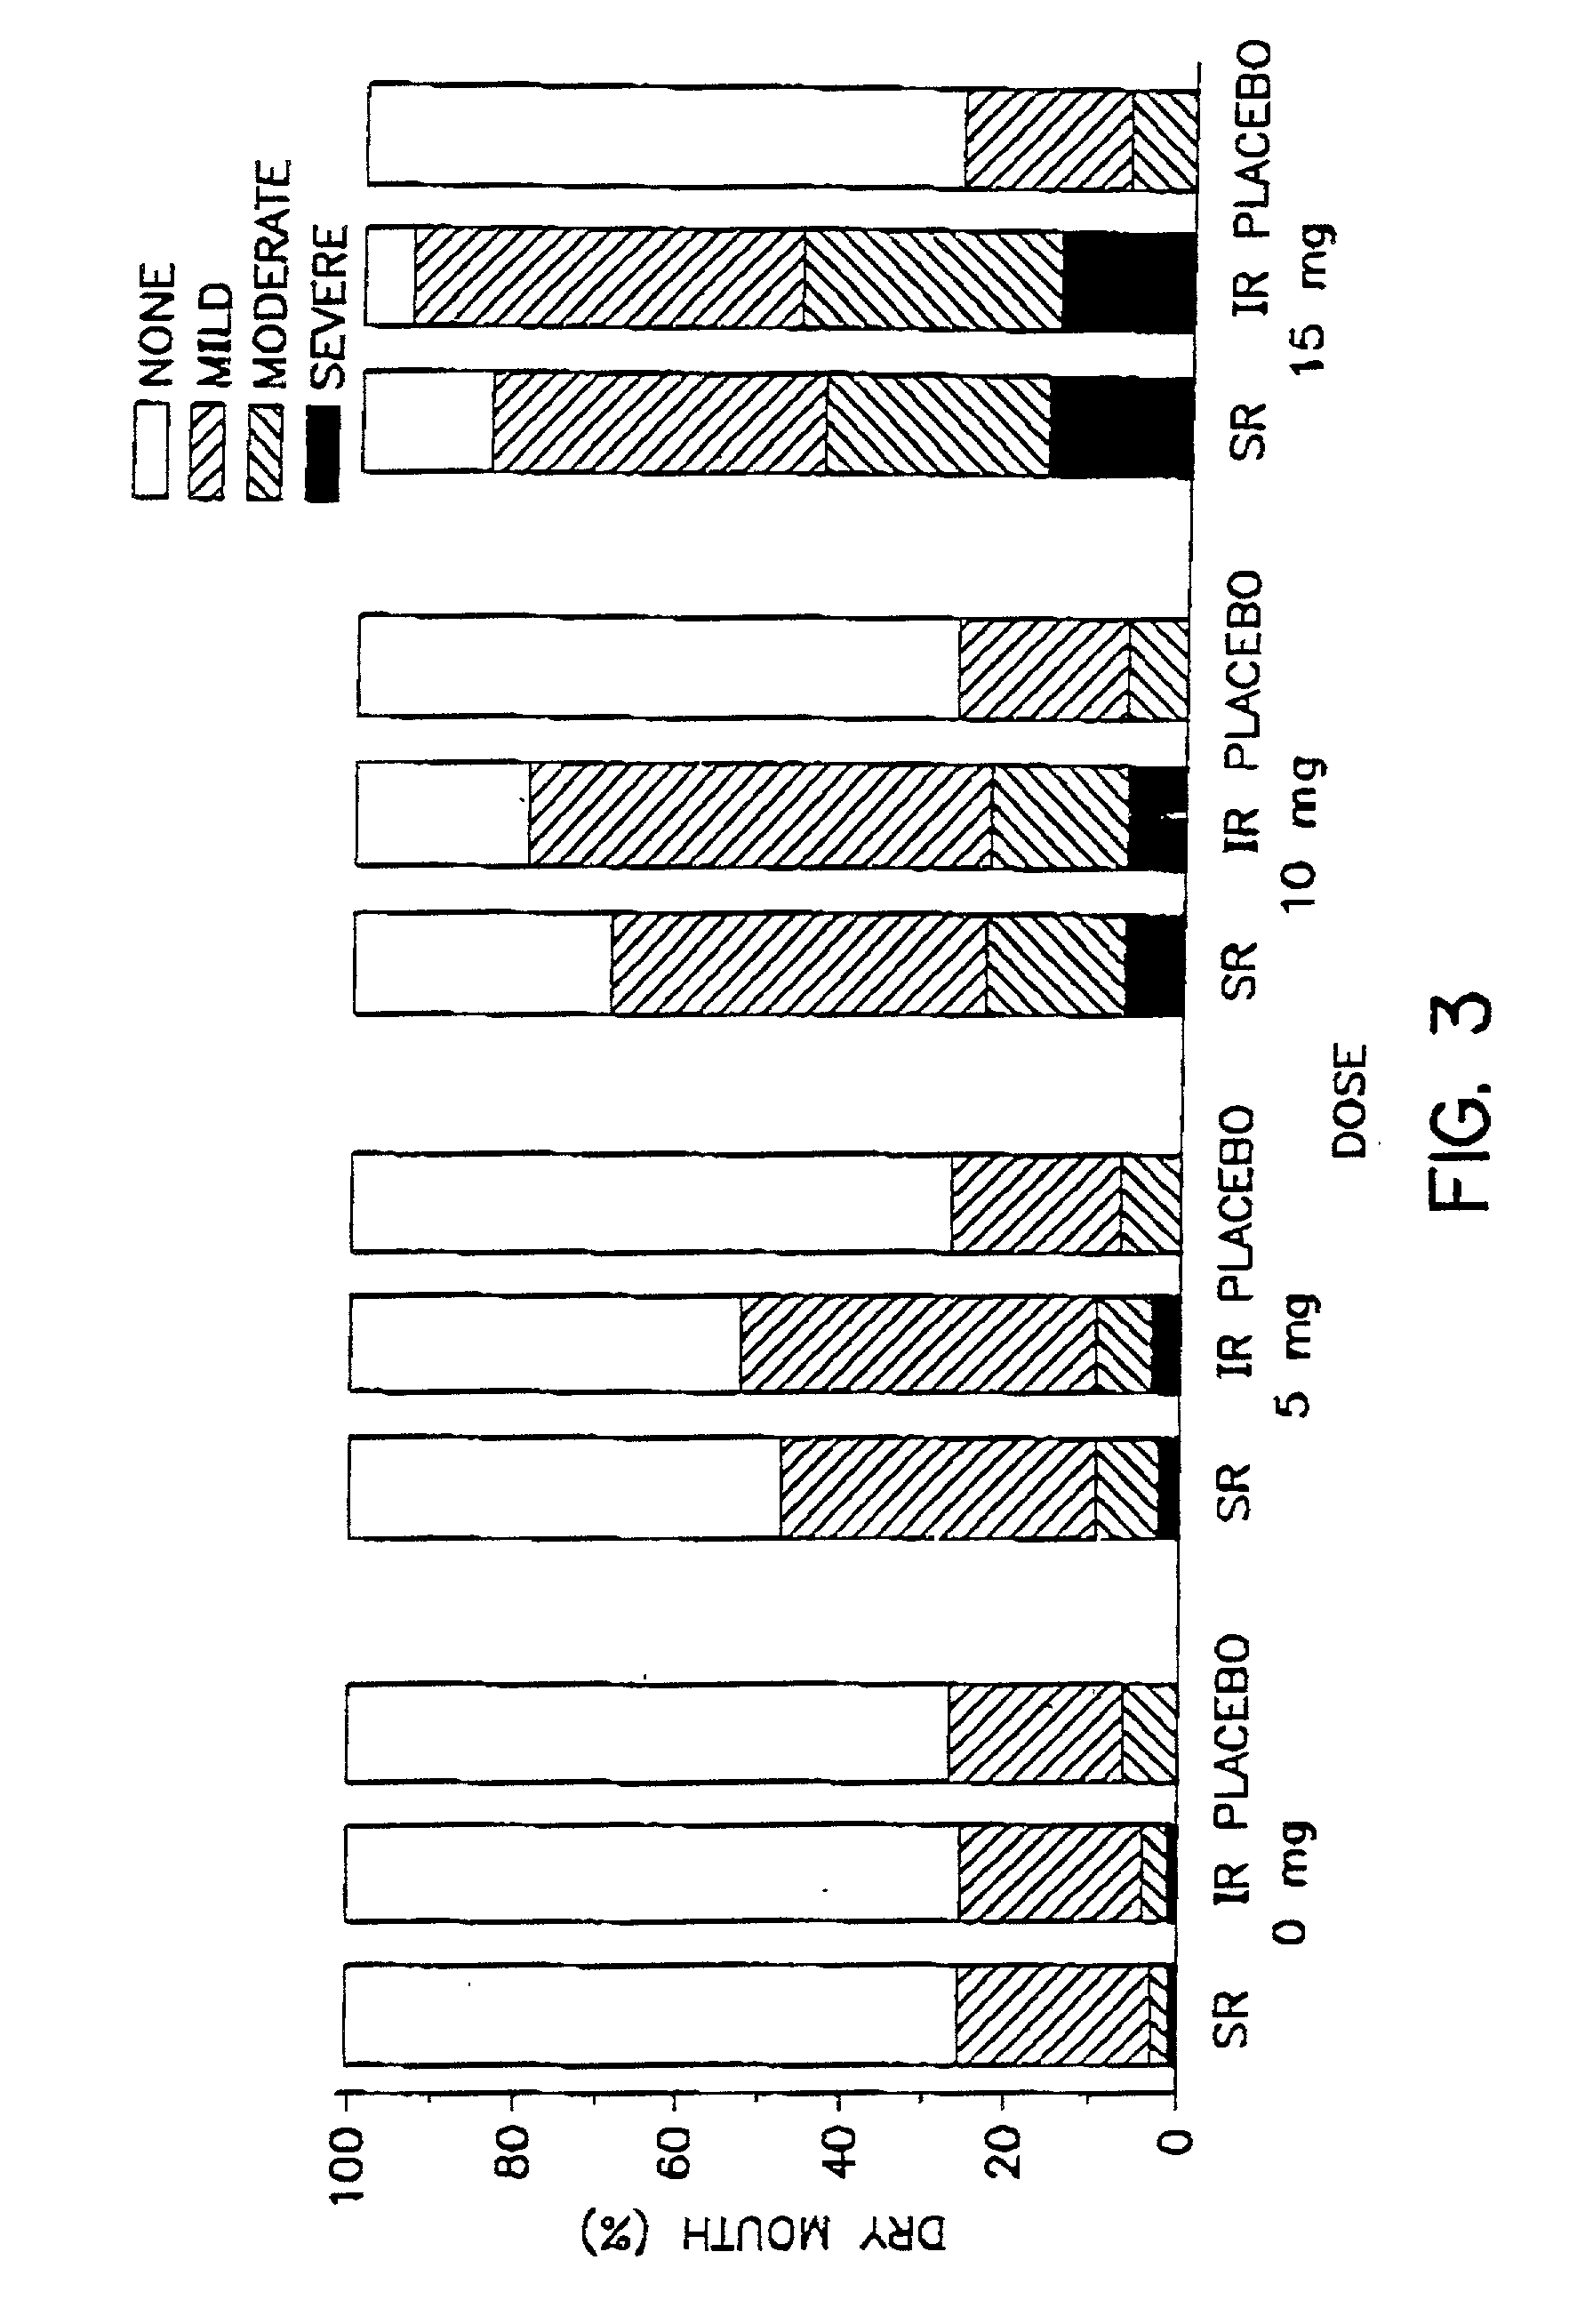 Method for treating incontinence